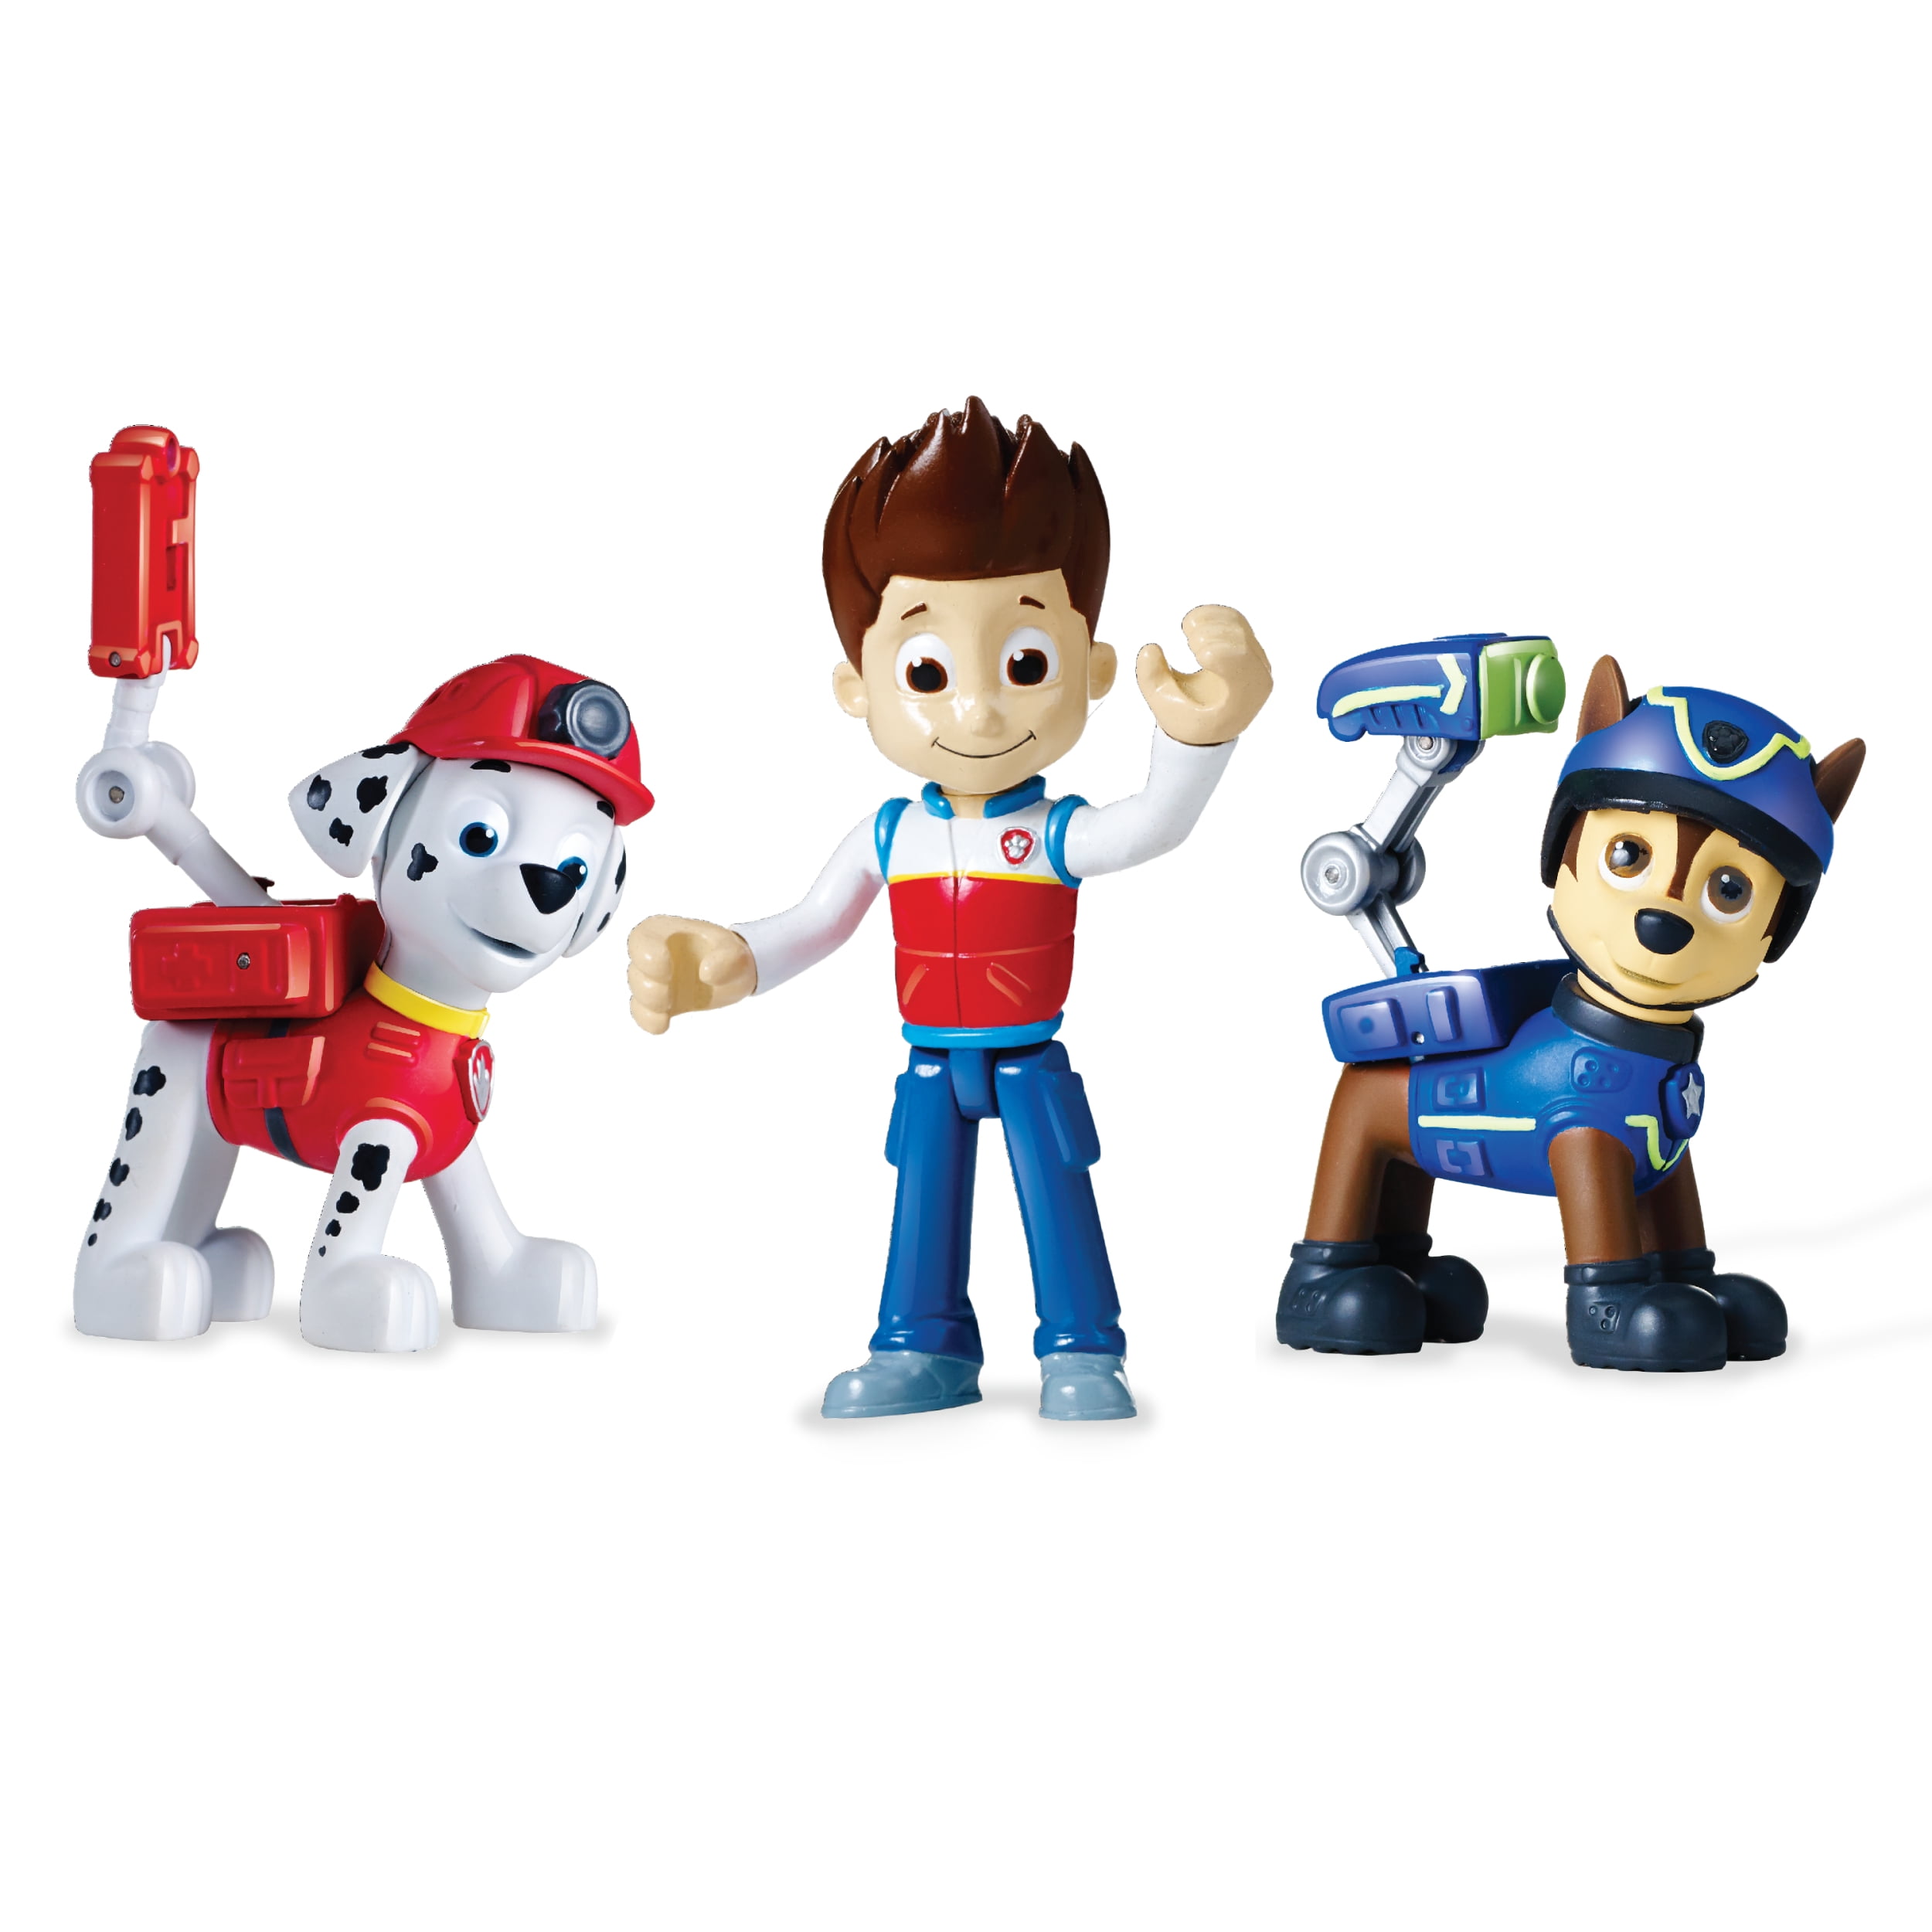 Paw Patrol Action Pack Pups 3-Pack, Ryder, Chase and Marshall Walmart.com